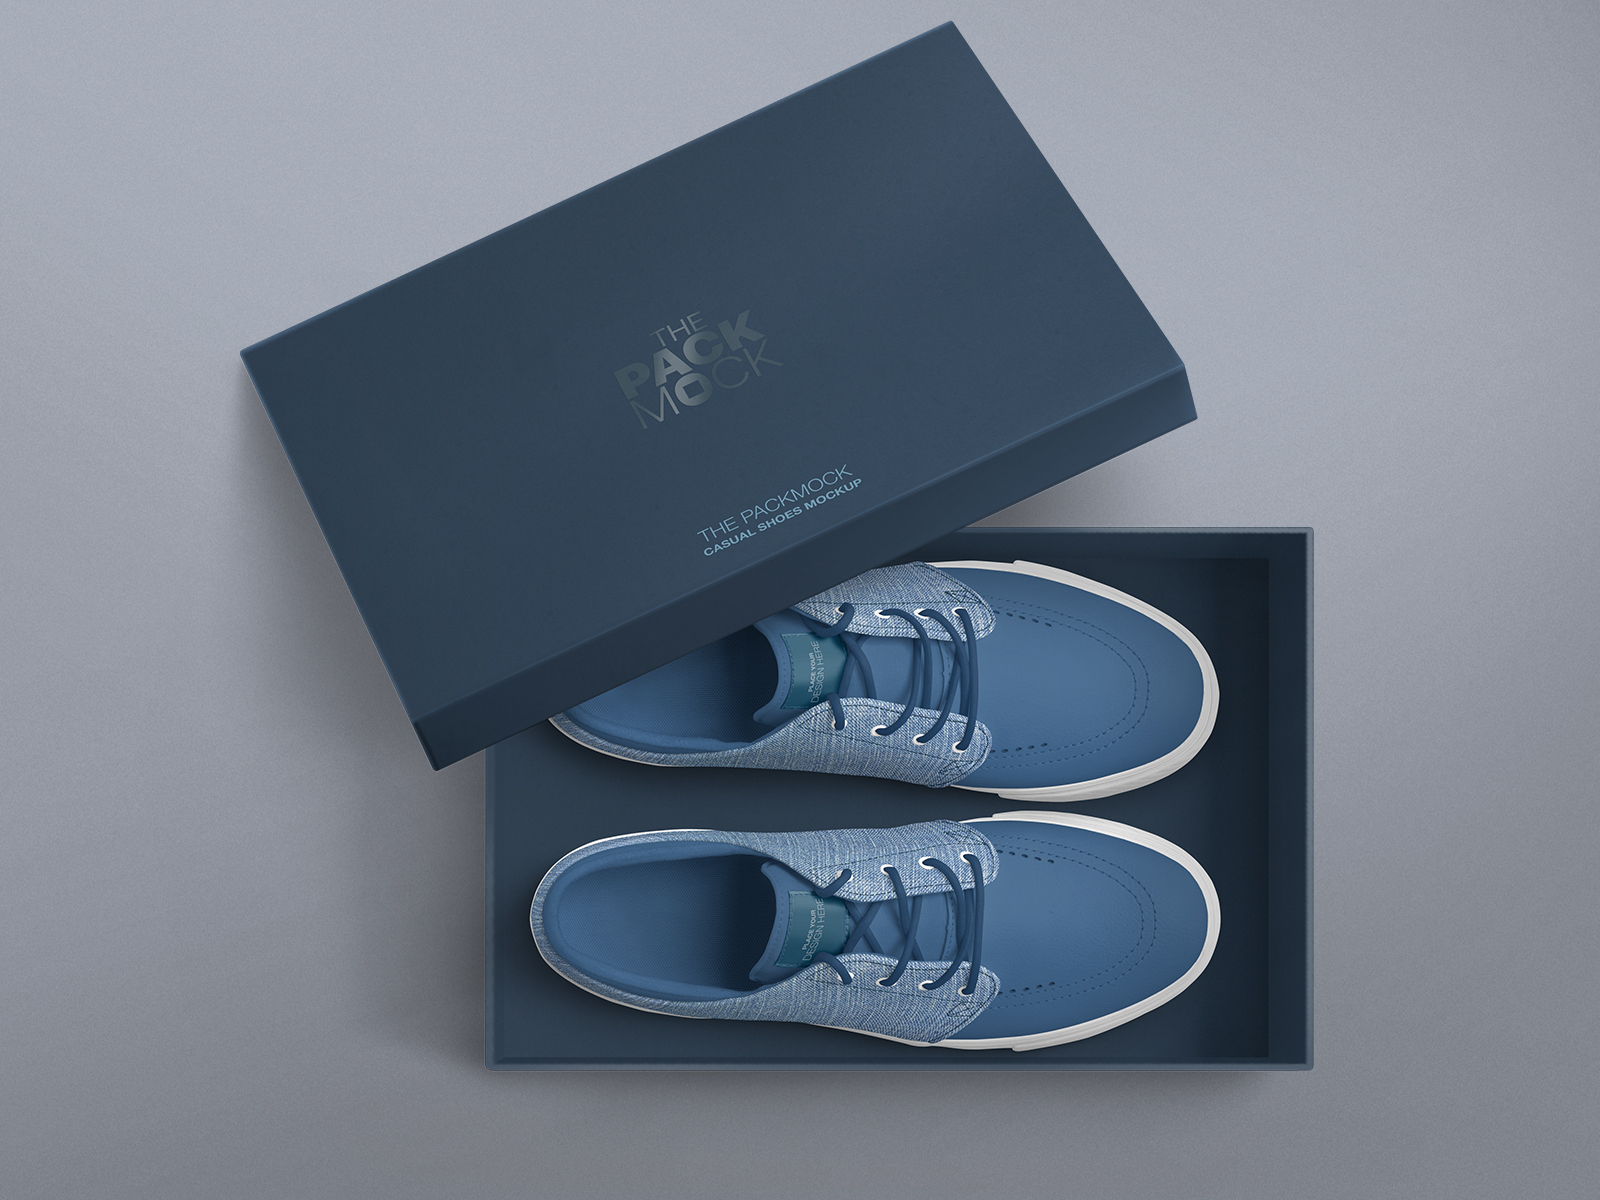 Download Shoes and Shoebox Mockups Set by Mockup5 on Dribbble